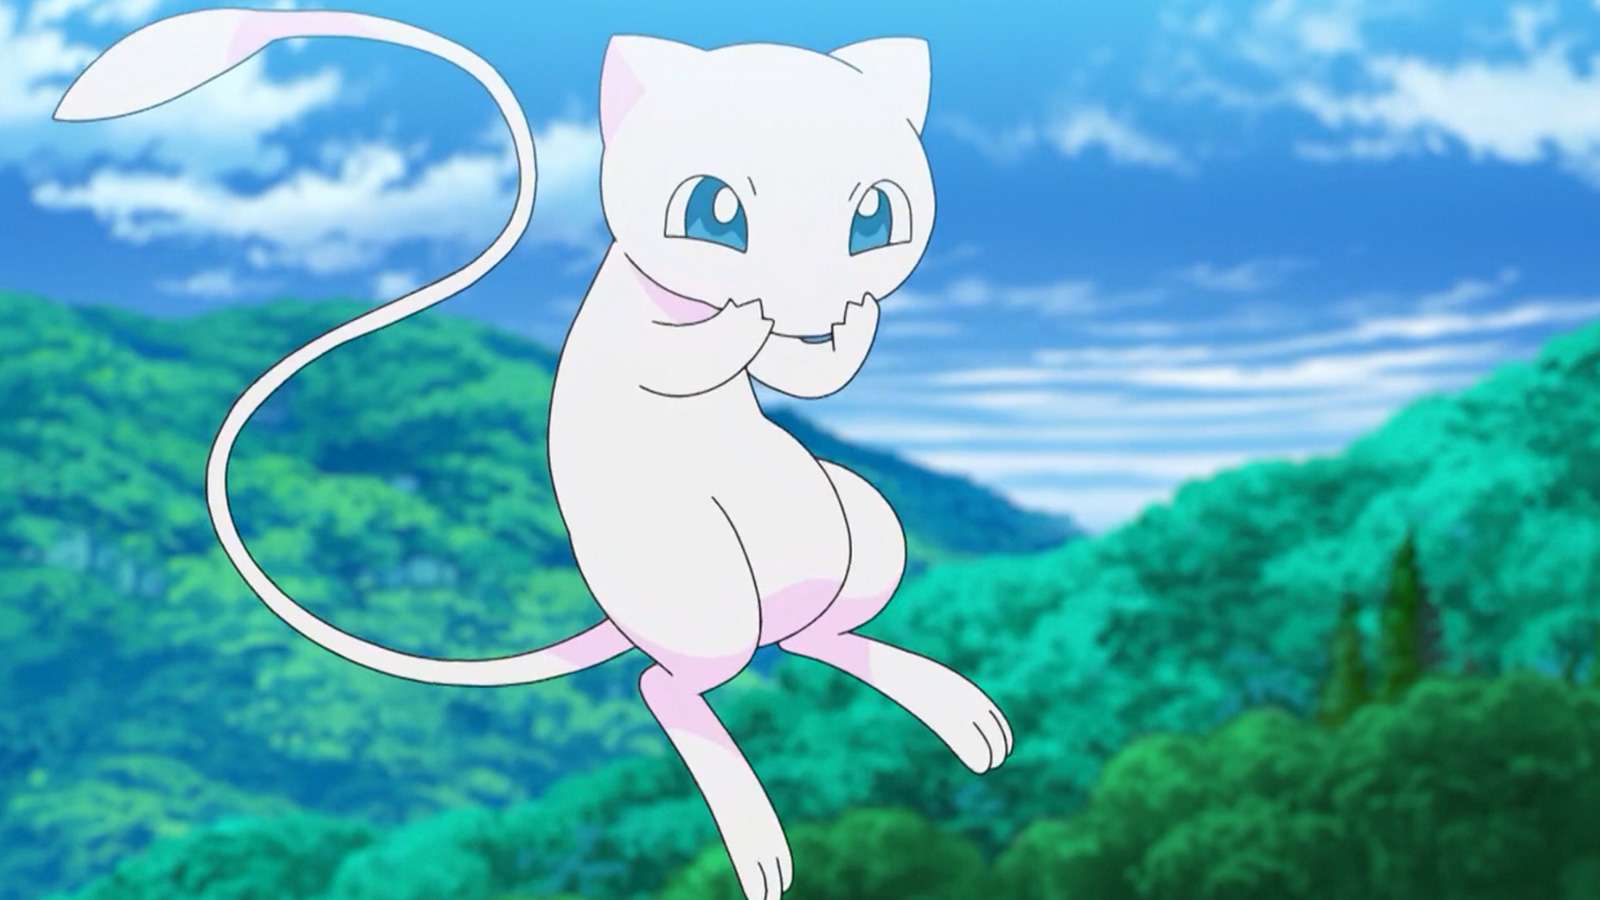 Screenshot of Mew from the Pokemon anime.